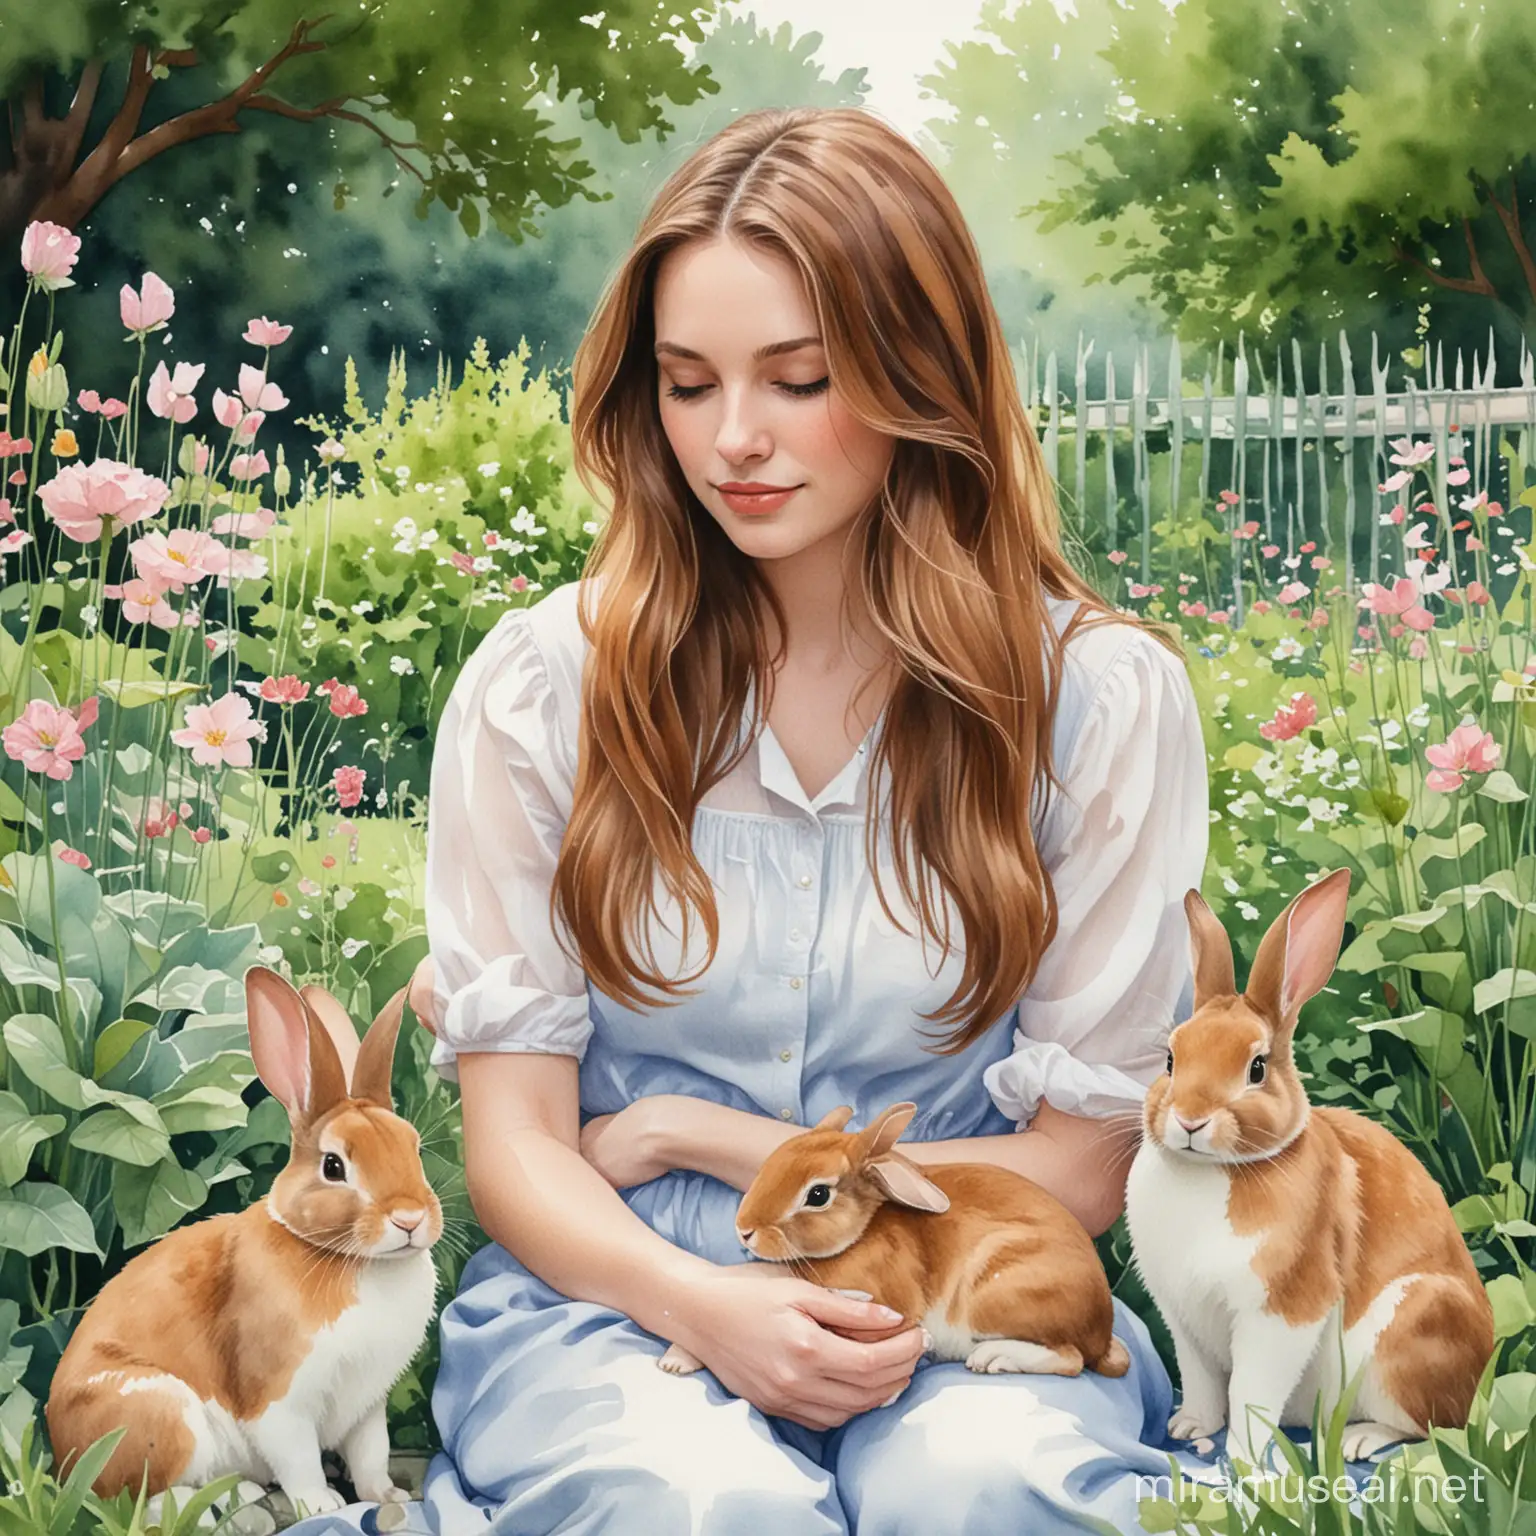 A watercolor painting of a female with mid long brown hair. Sitting alone with two bunnies in a beautiful garden.